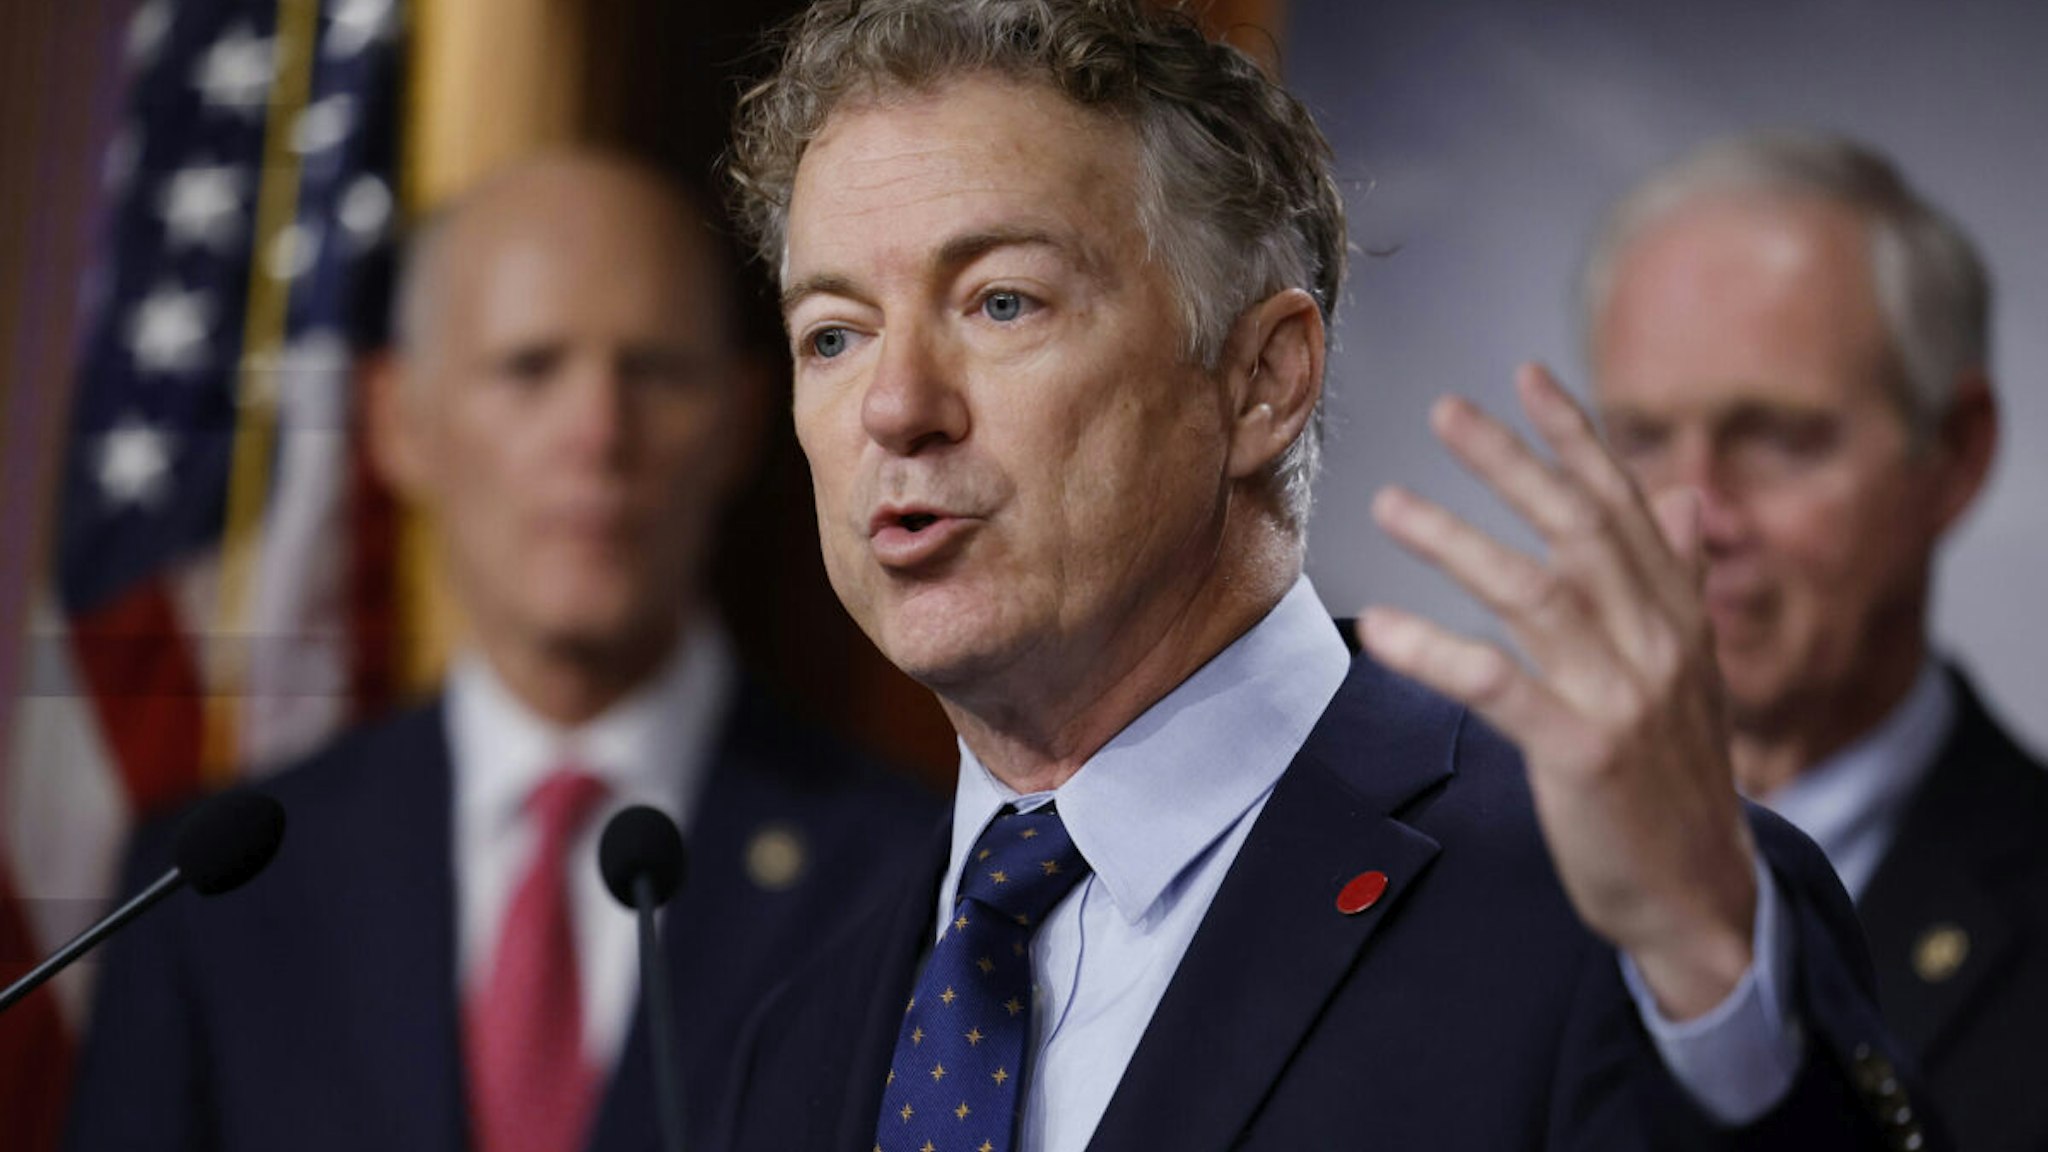 Sen. Rand Paul (R-KY) speaks against the federal omnibus spending legislation for FY 2023 that at a news conference with Sen. Rick Scott (R-FL) (L) and Sen. Ron Johnson (R-WI) at the U.S. Capitol on December 20, 2022 in Washington, DC.